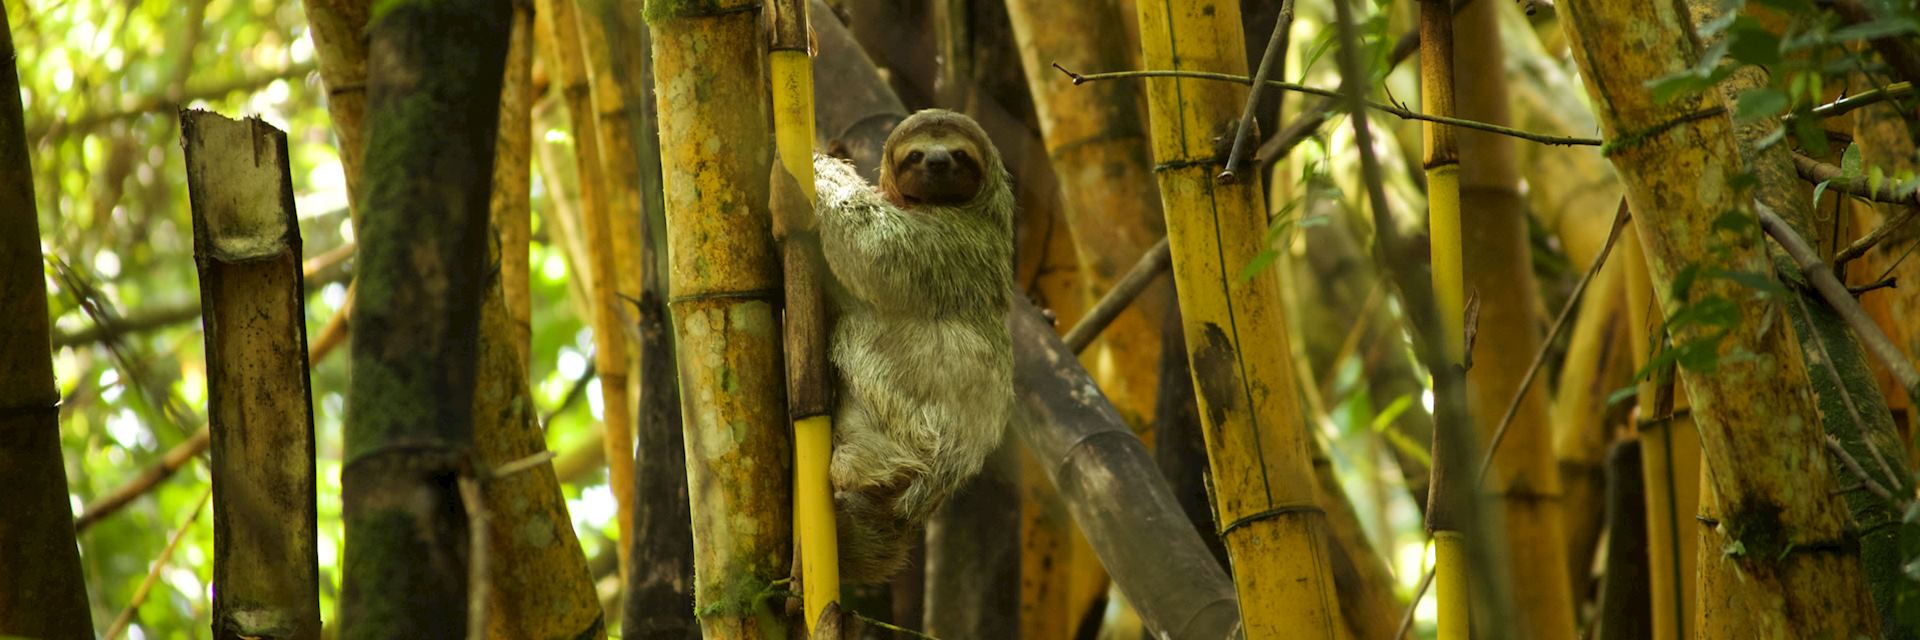 Sloth in a bamboo tree in Costa Rica